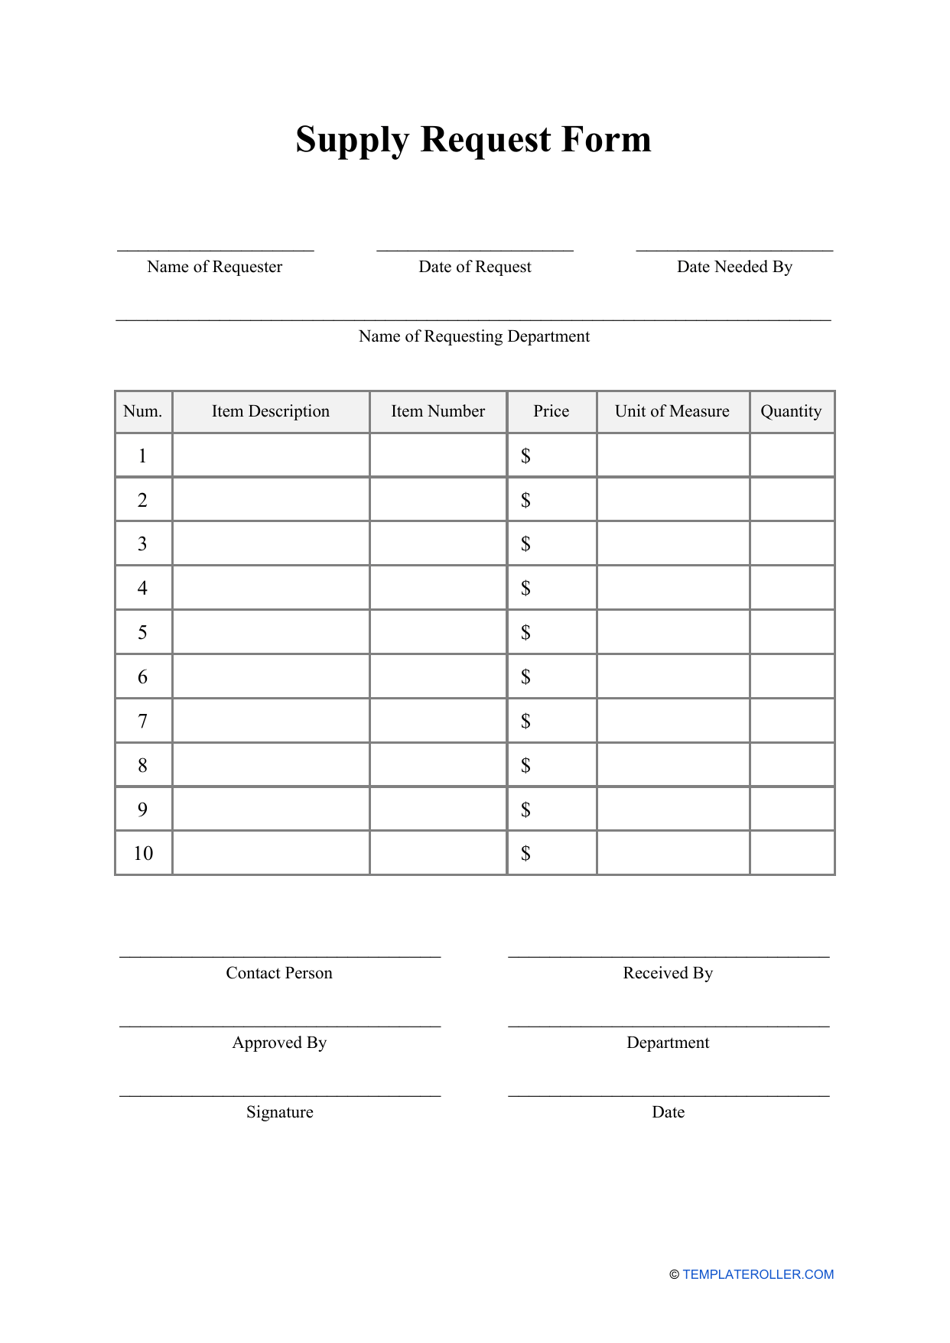 Supply Request Form - Fill Out, Sign Online and Download PDF ...